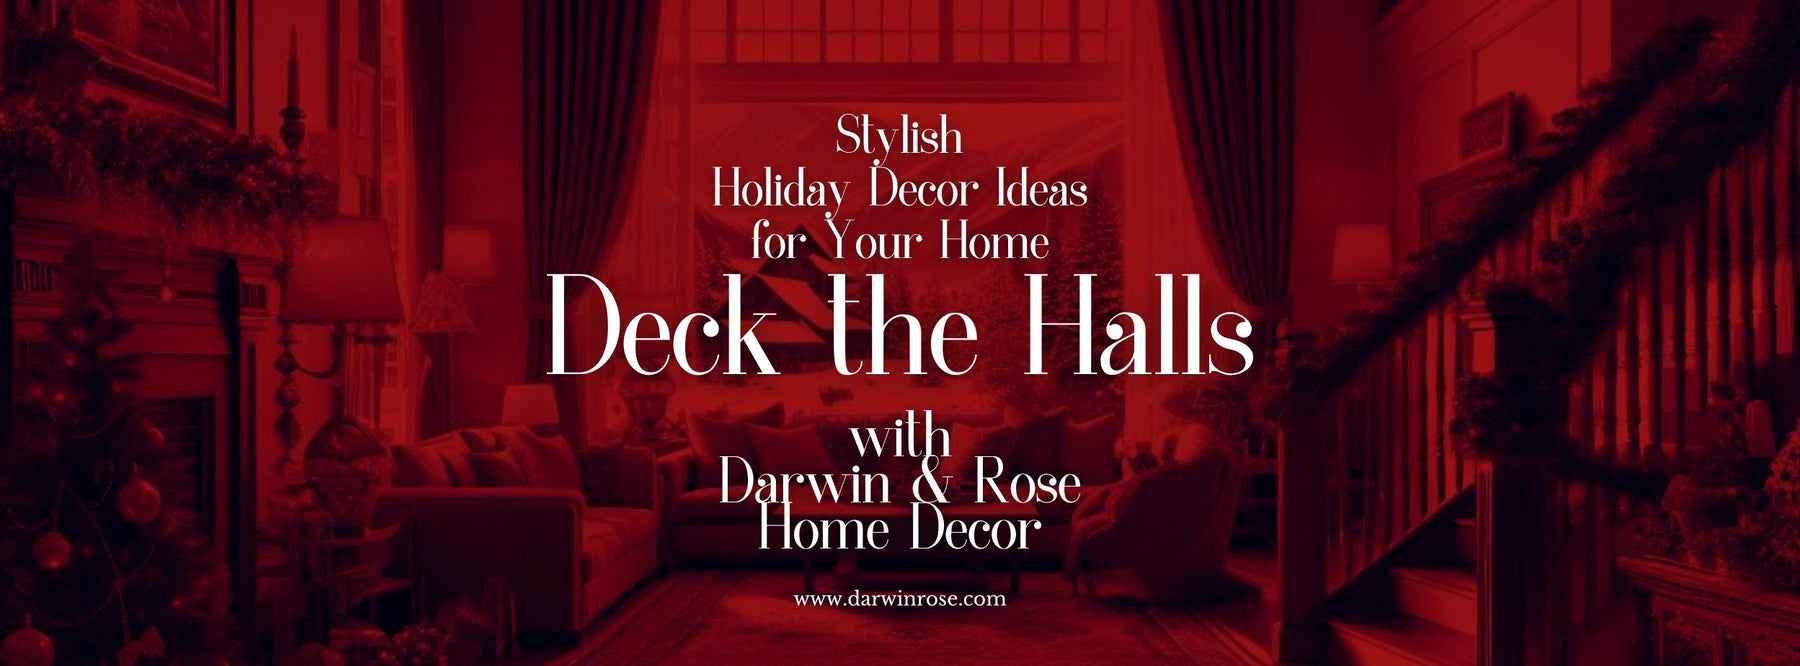 Deck the Halls: Stylish Holiday Decor Ideas for Your Home